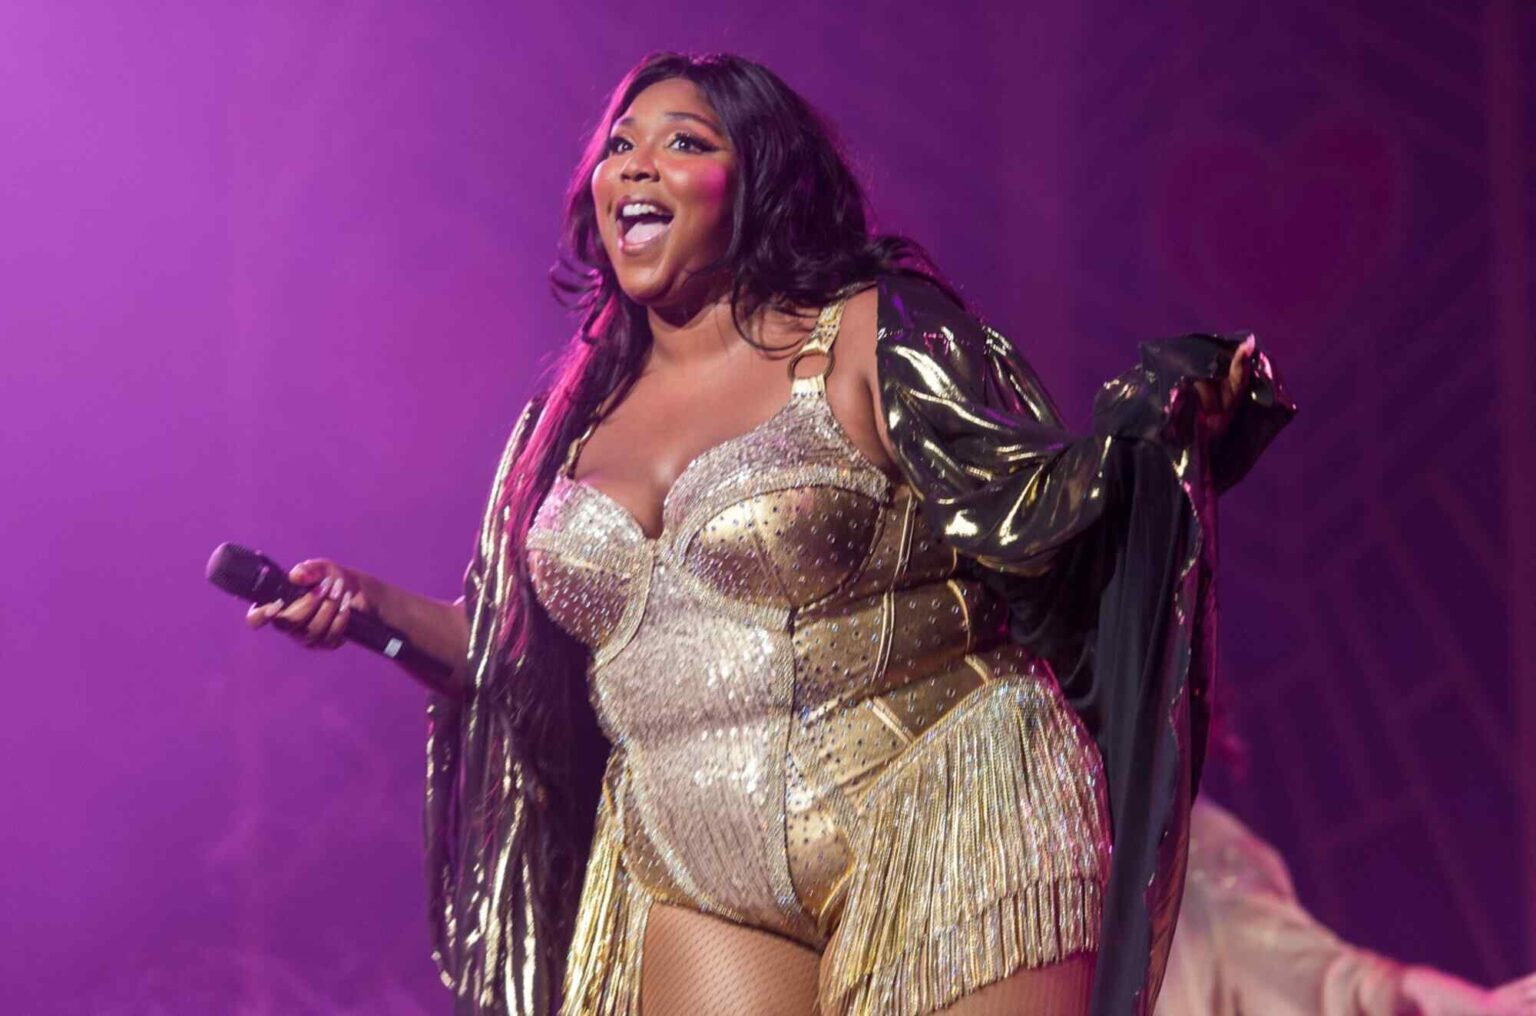 Lizzo recently posted a gorgeous nude photo on Instagram, and fans are loving it. Find out what the talented star has to say about self-love here.